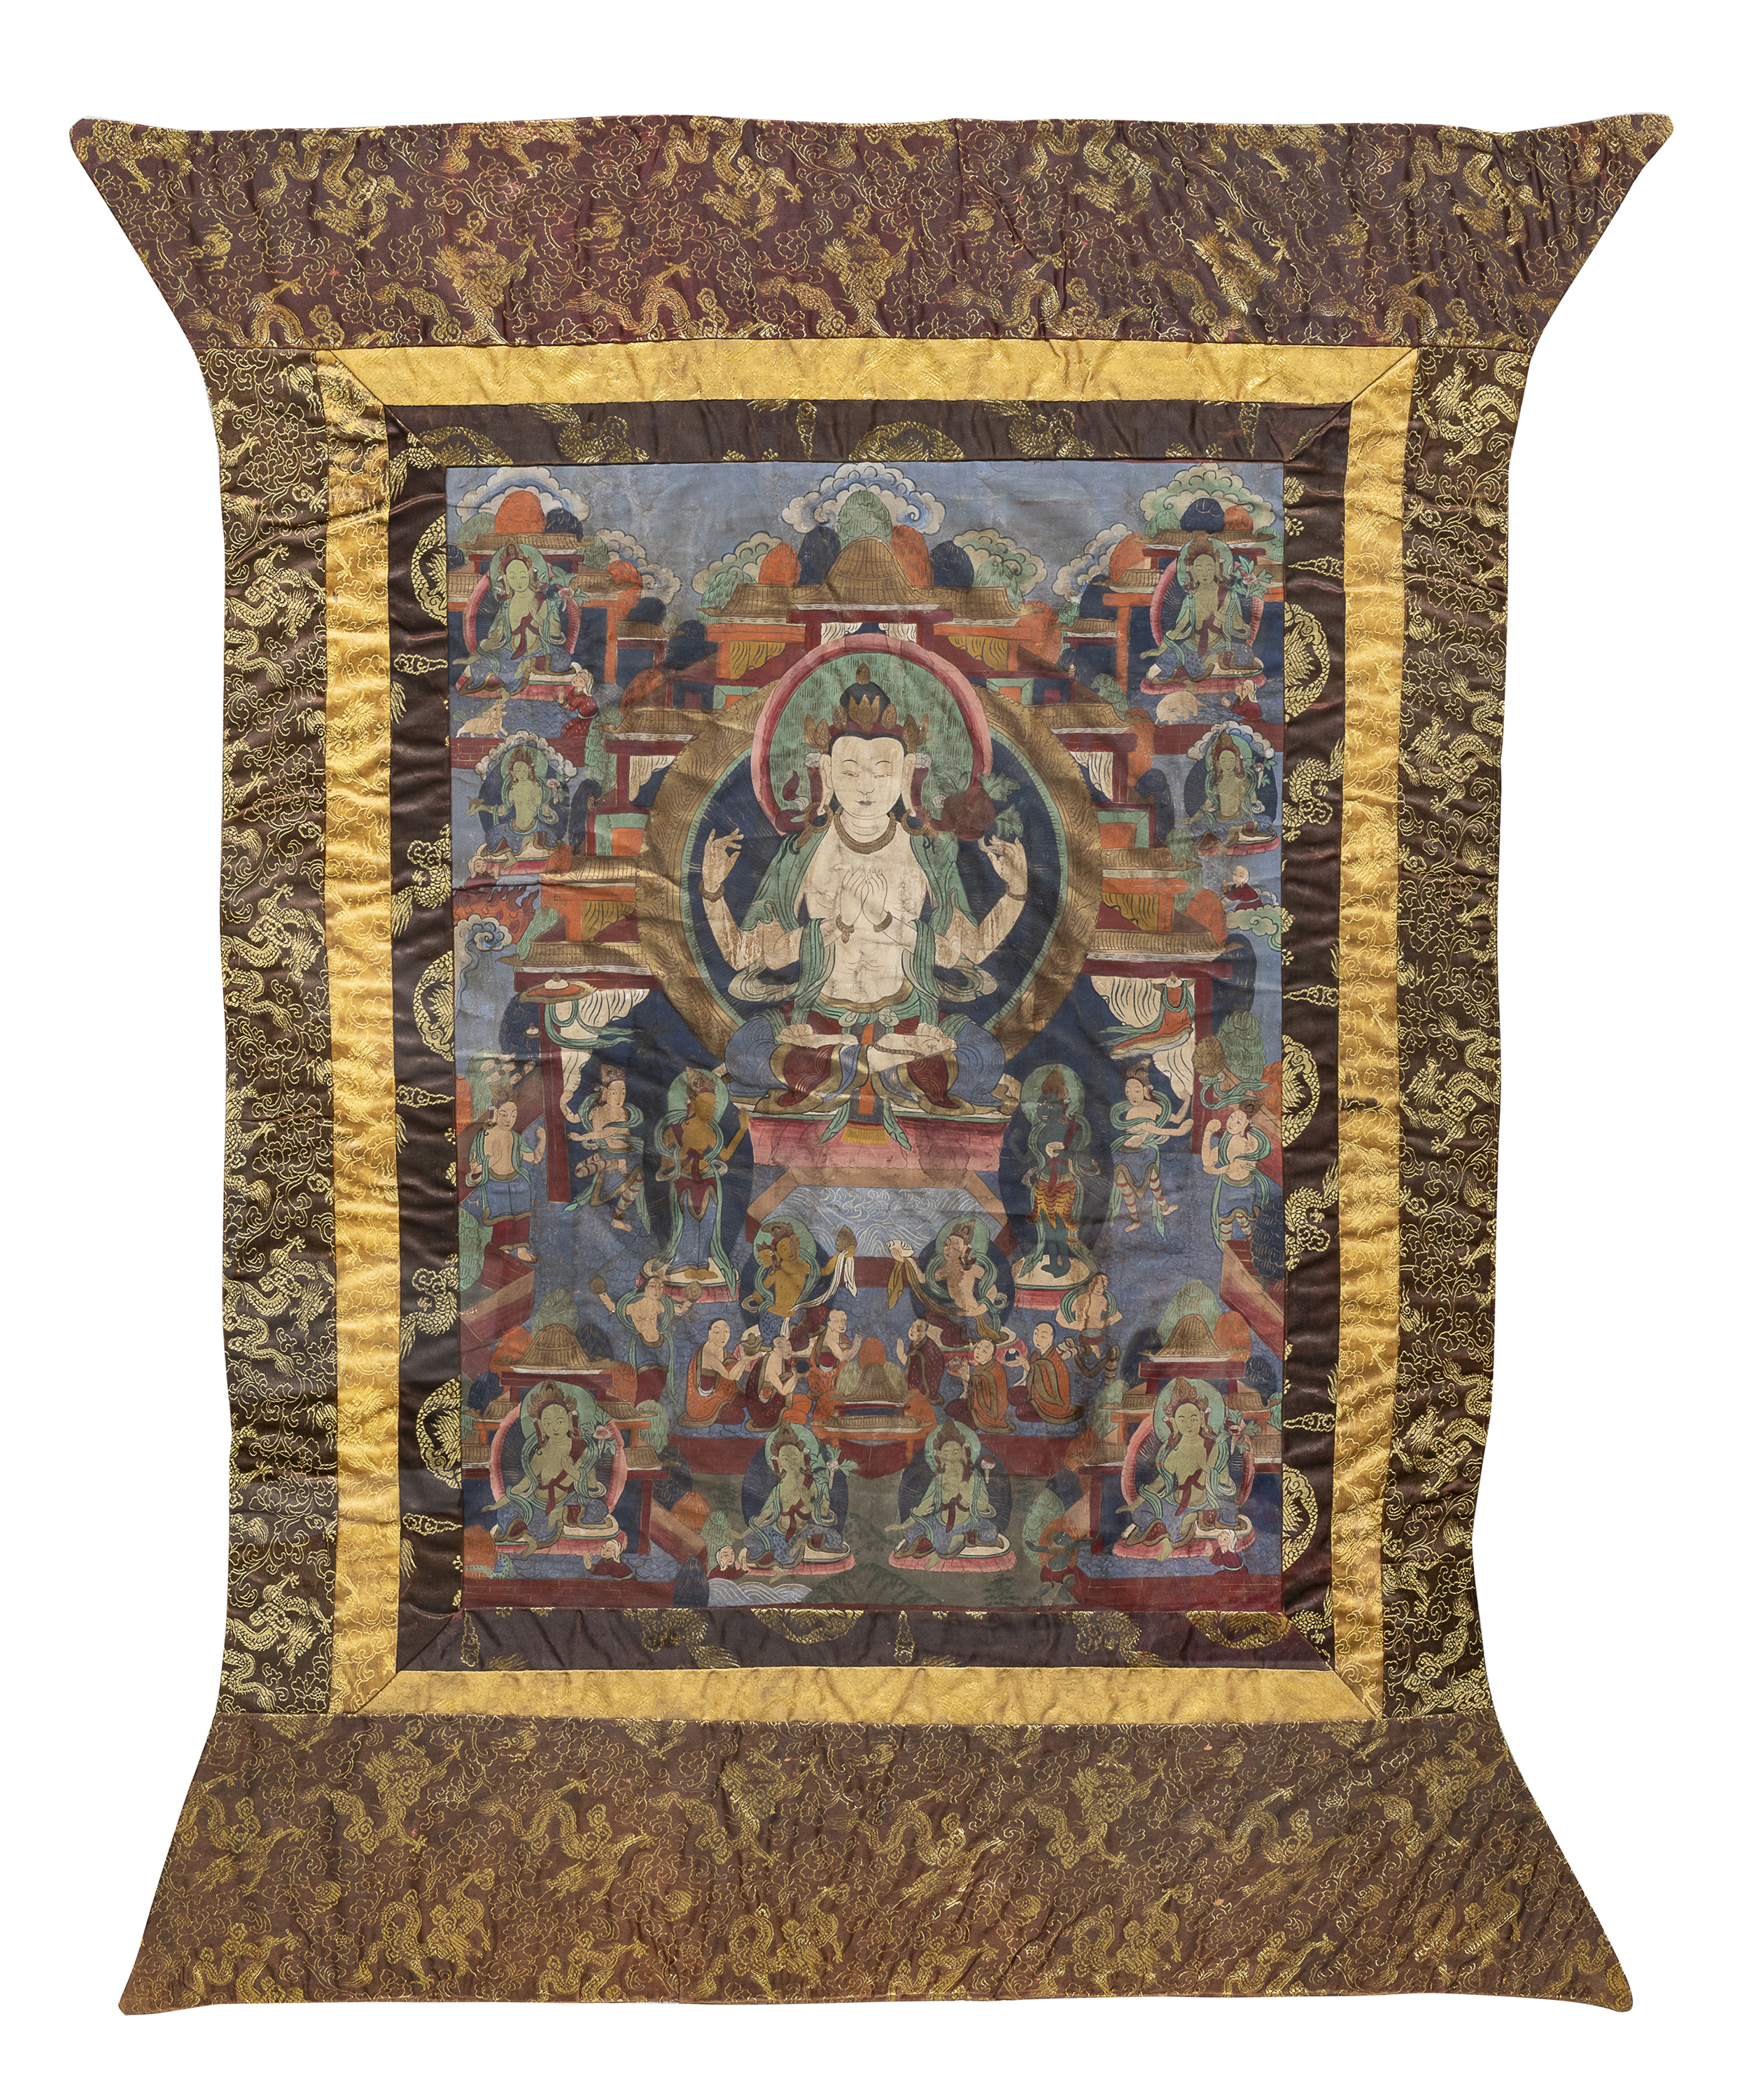 A PAIR OF TANKA ON SILK. PROBABLY TIBET EARLY 20TH CENTURY.